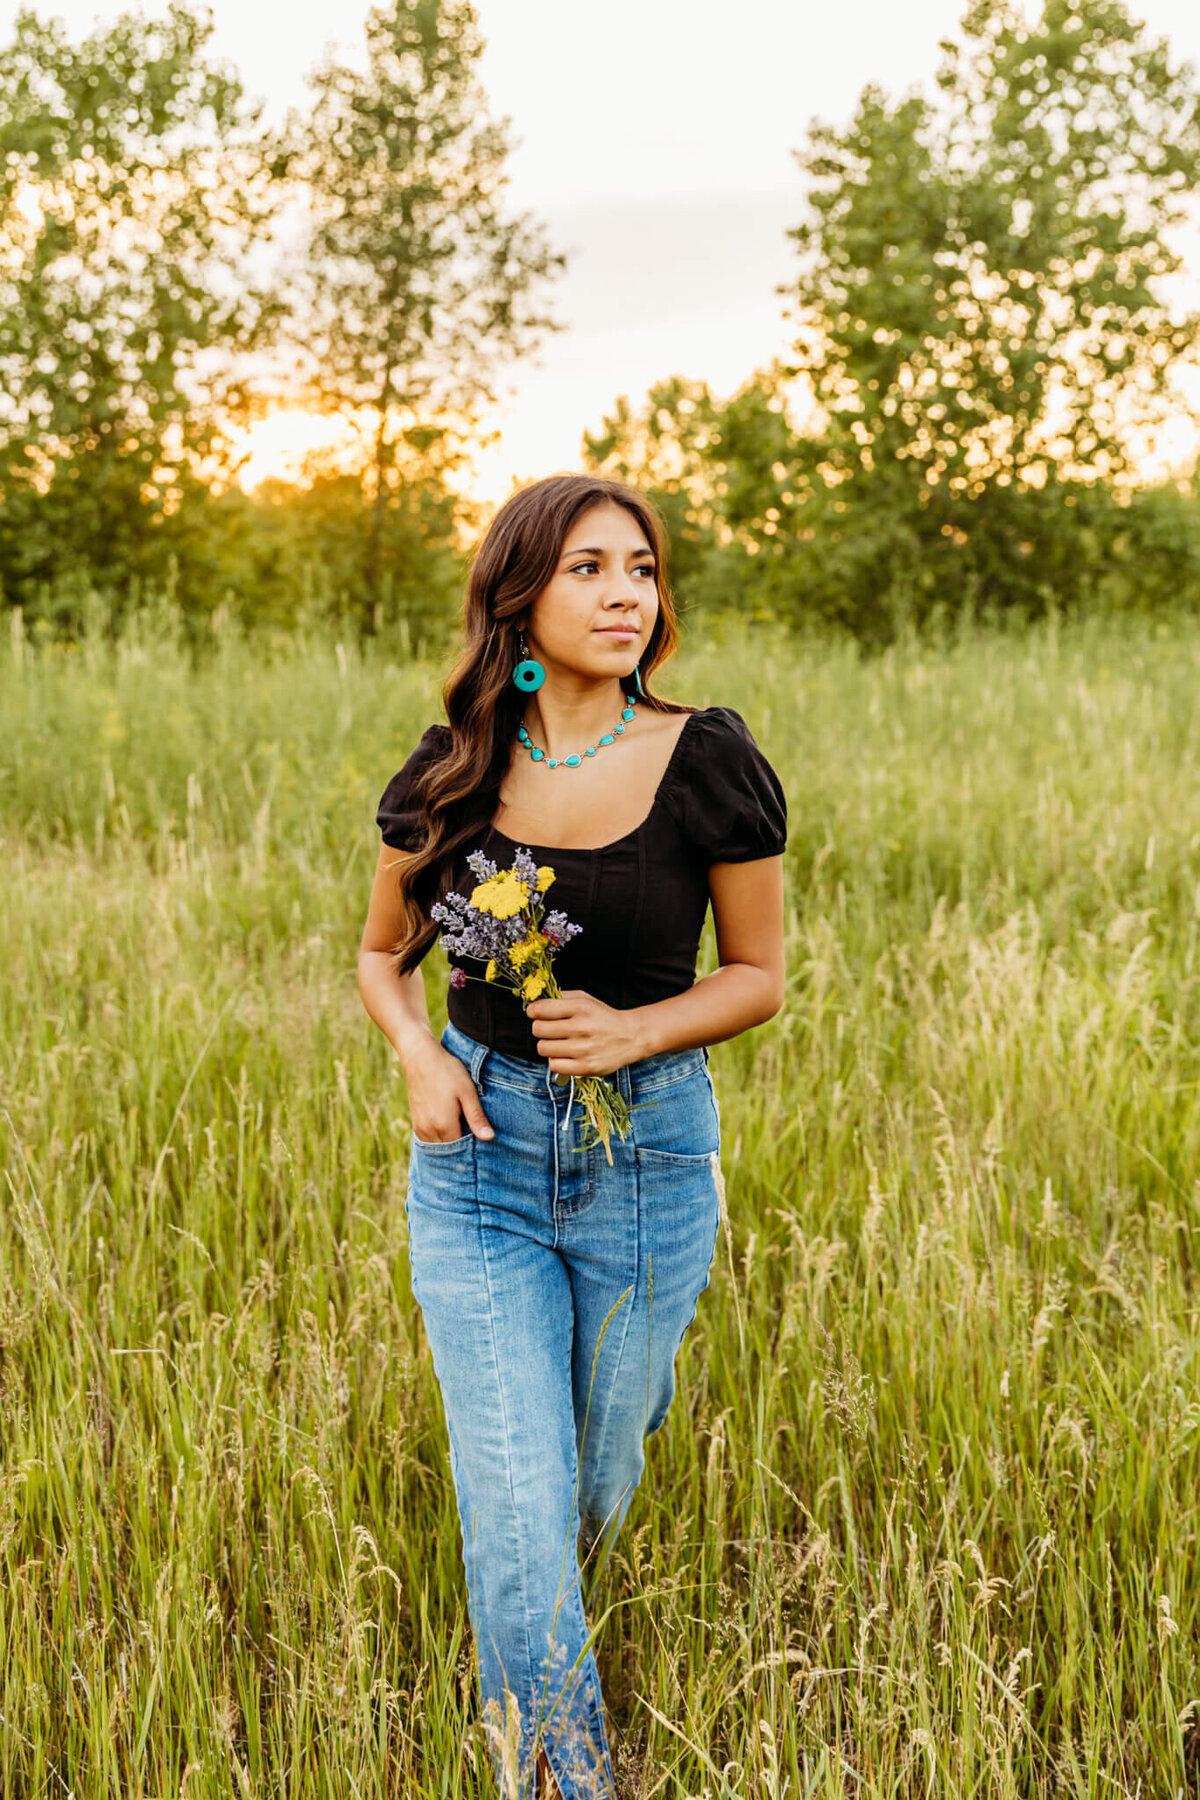 teenage girl styled beautifully with black top, jeans and turquoise jewelry gazing out into the distance during her Oshkosh senior photography session